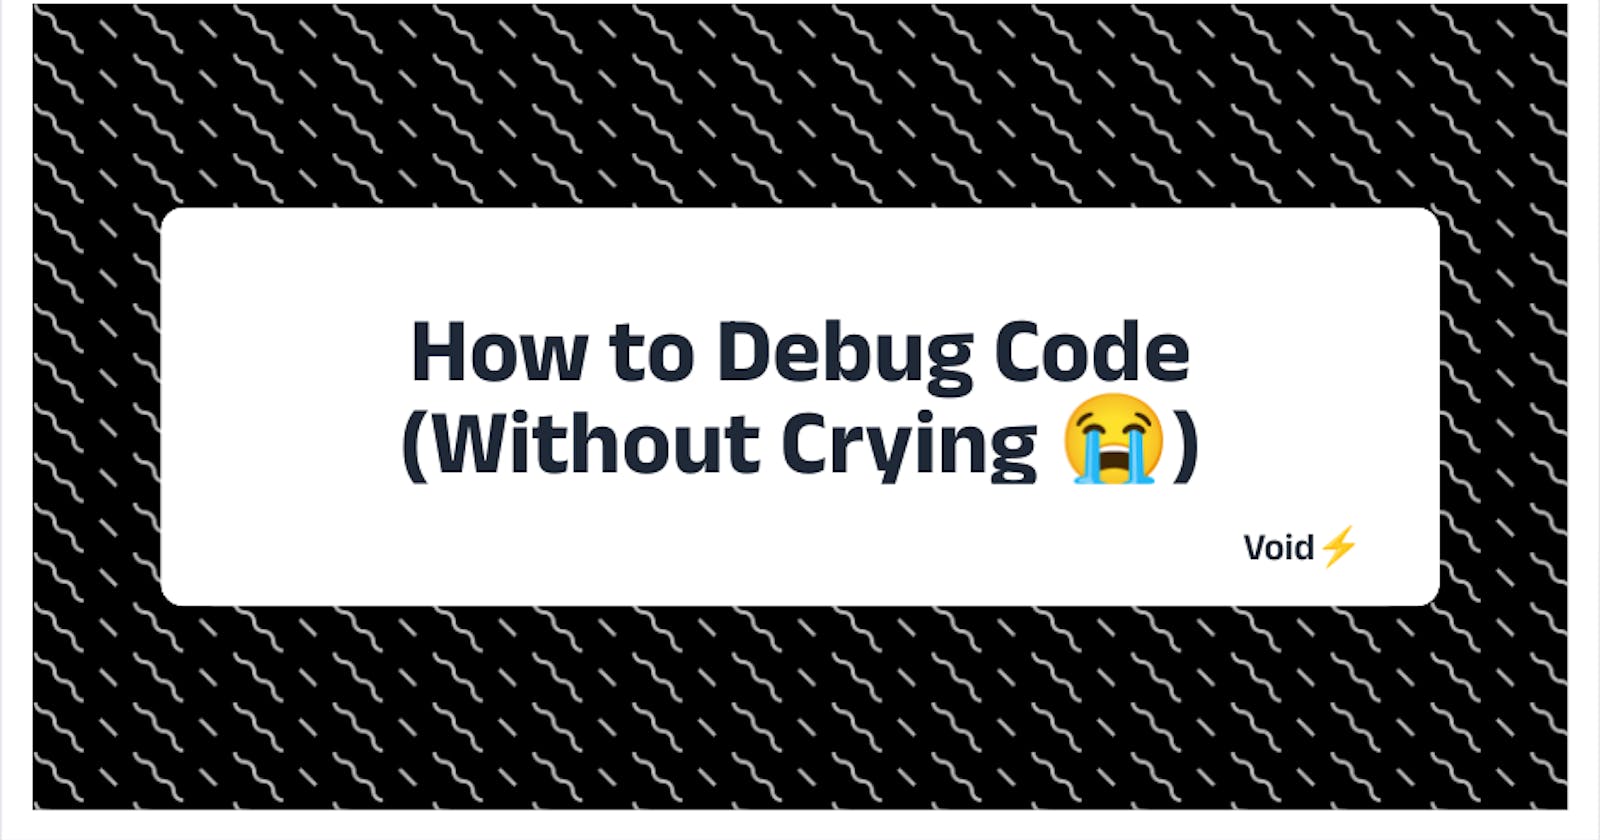 How to Debug Code (Without Crying)